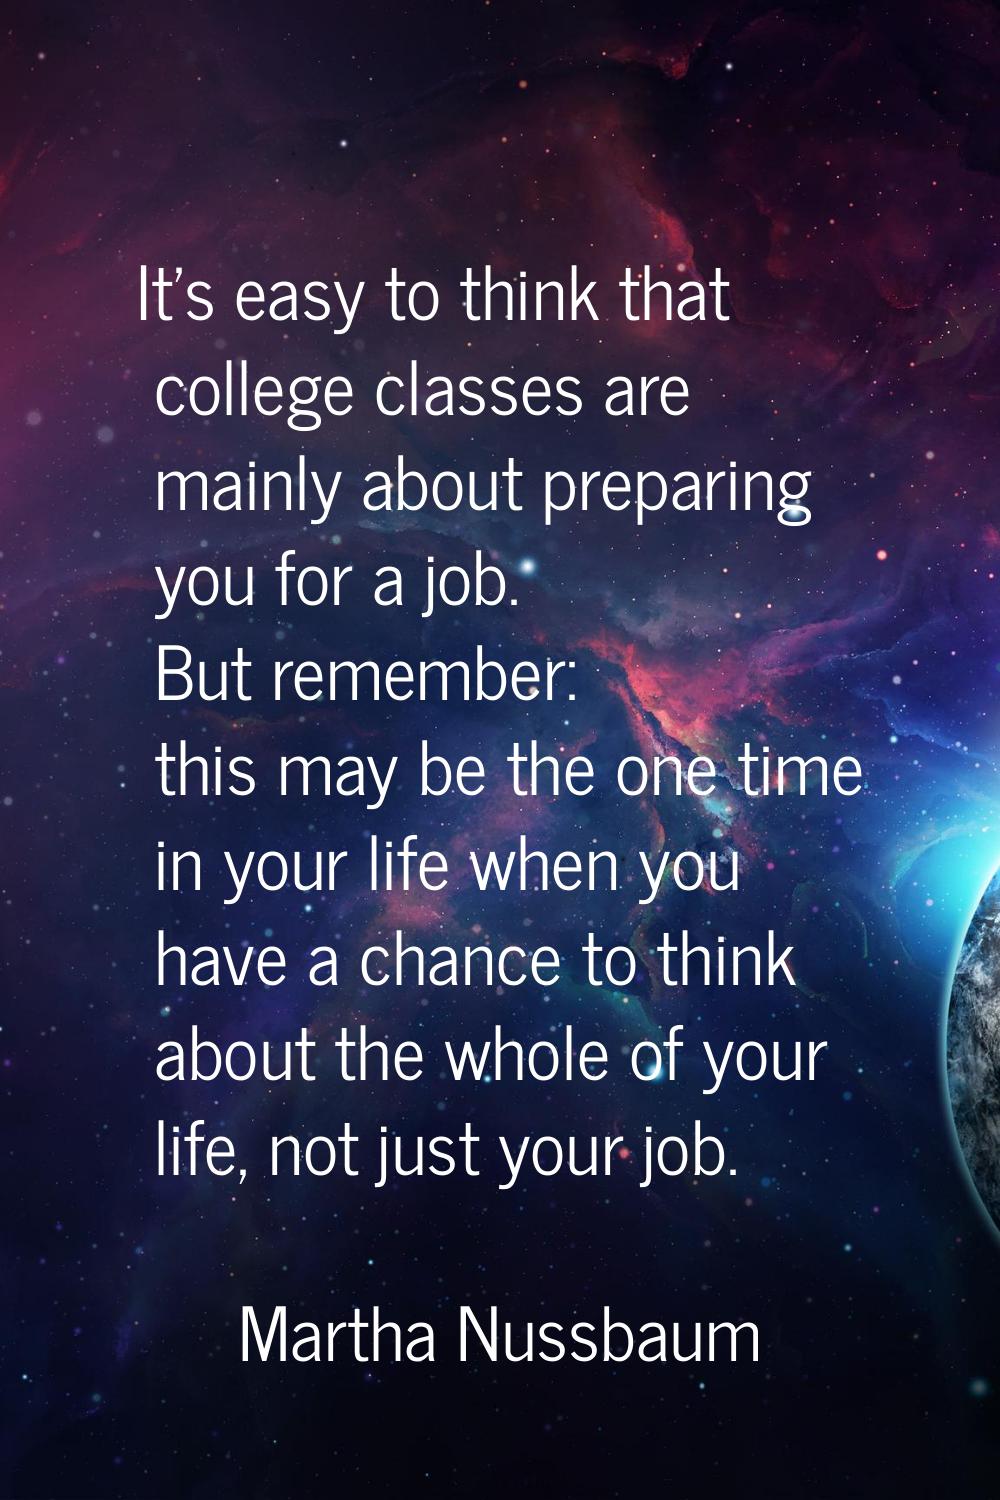 It's easy to think that college classes are mainly about preparing you for a job. But remember: thi